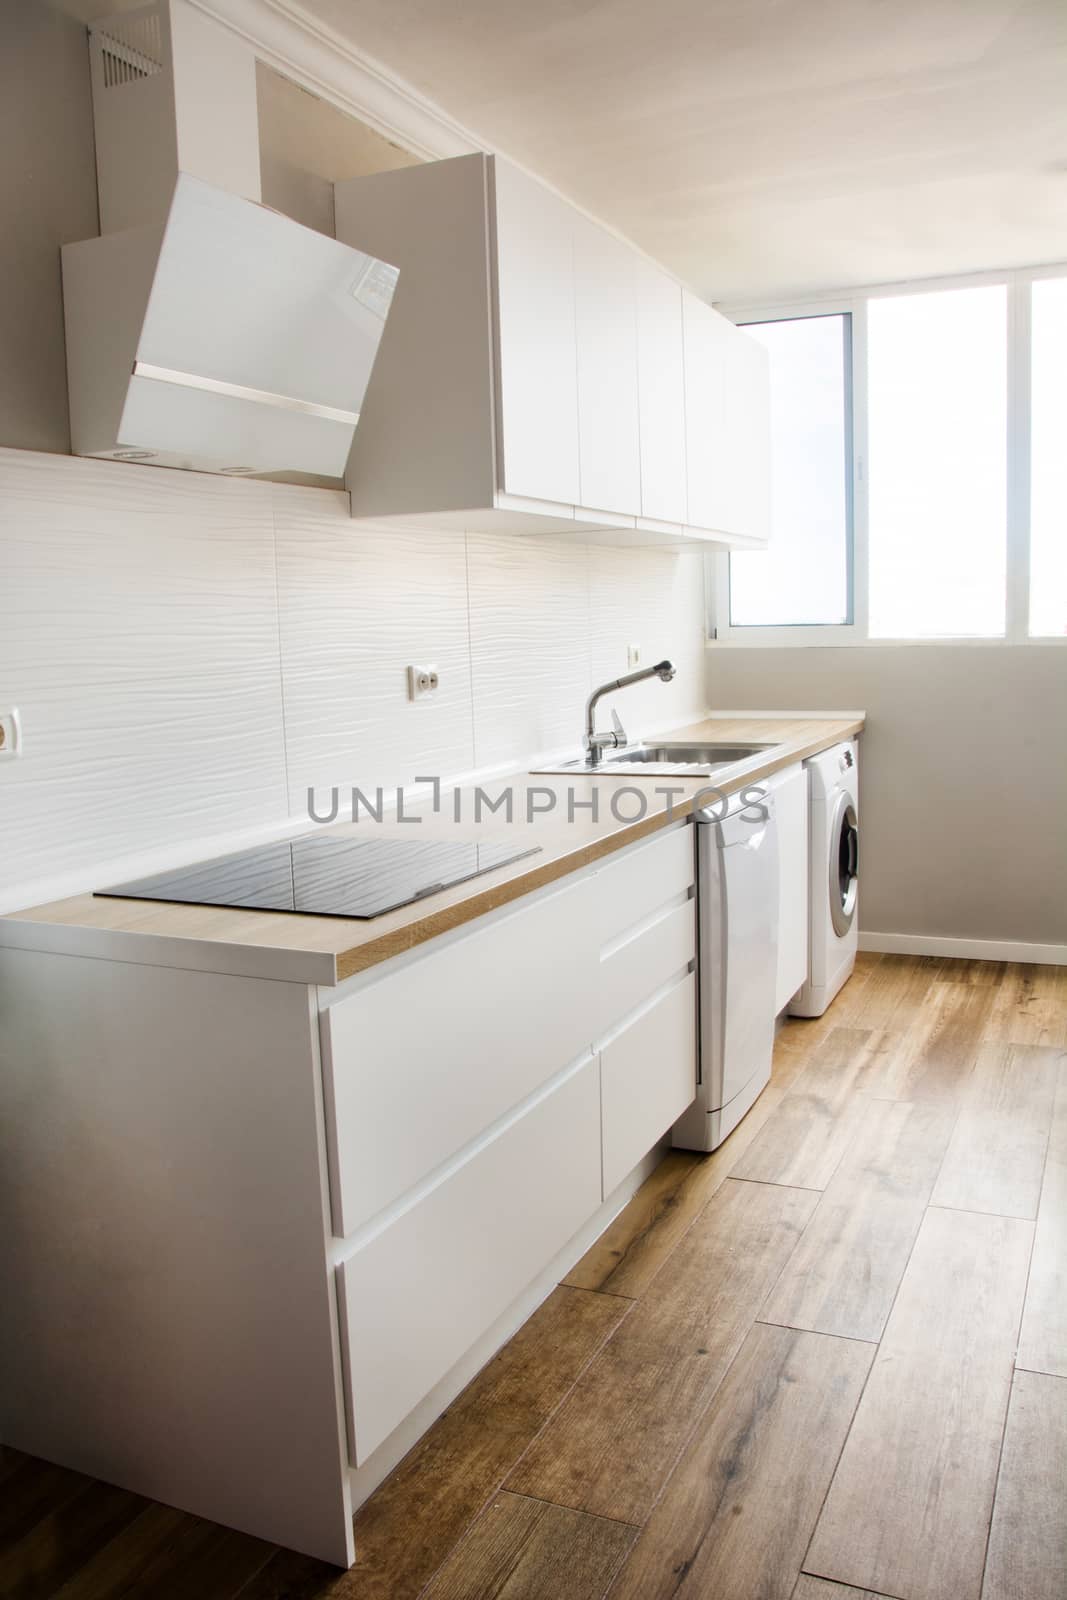 White modern kitchen with white furnitures and wooden floor by chandlervid85